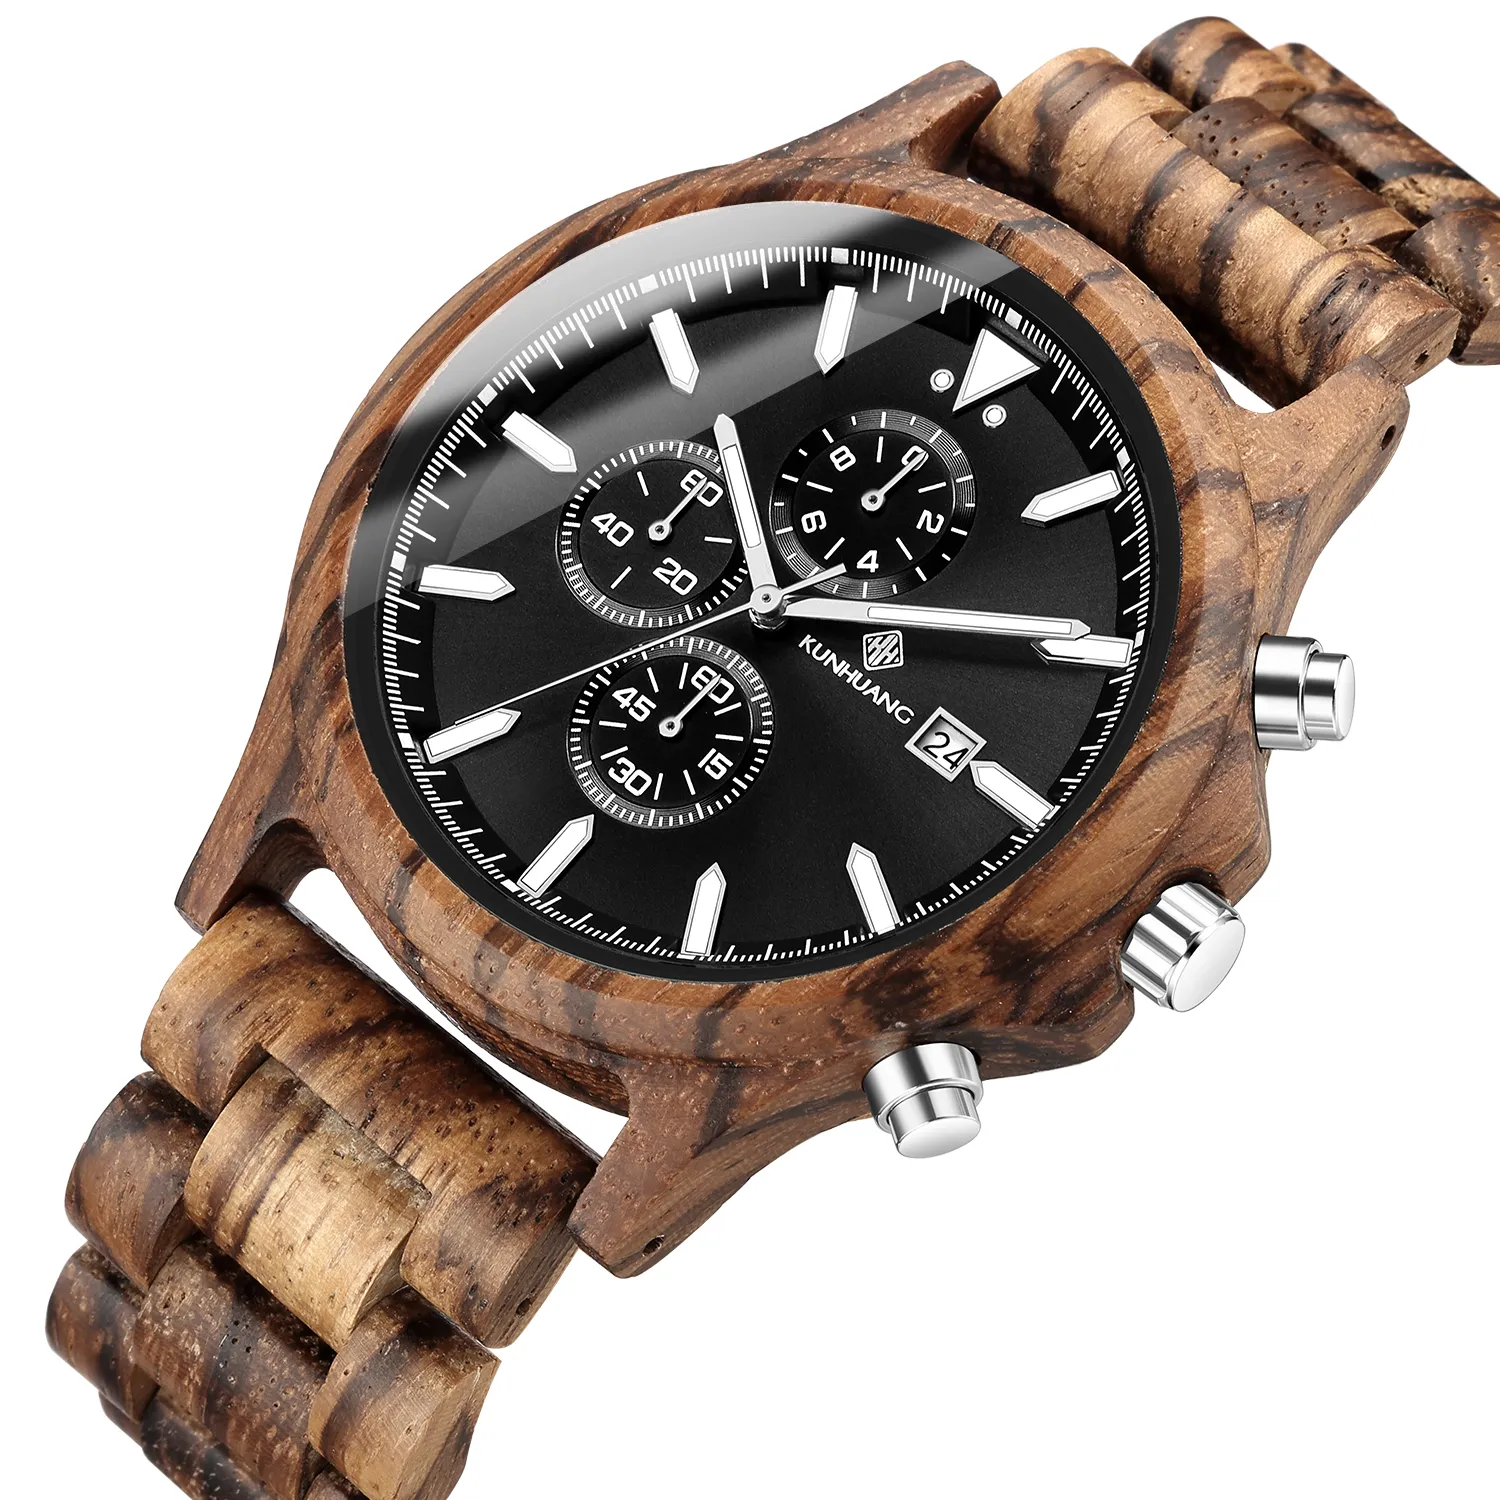 Men Wood Watch Chronograph Luxury Military Sport Watches Stylish Casual Personalized Wood Quartz Watches262k